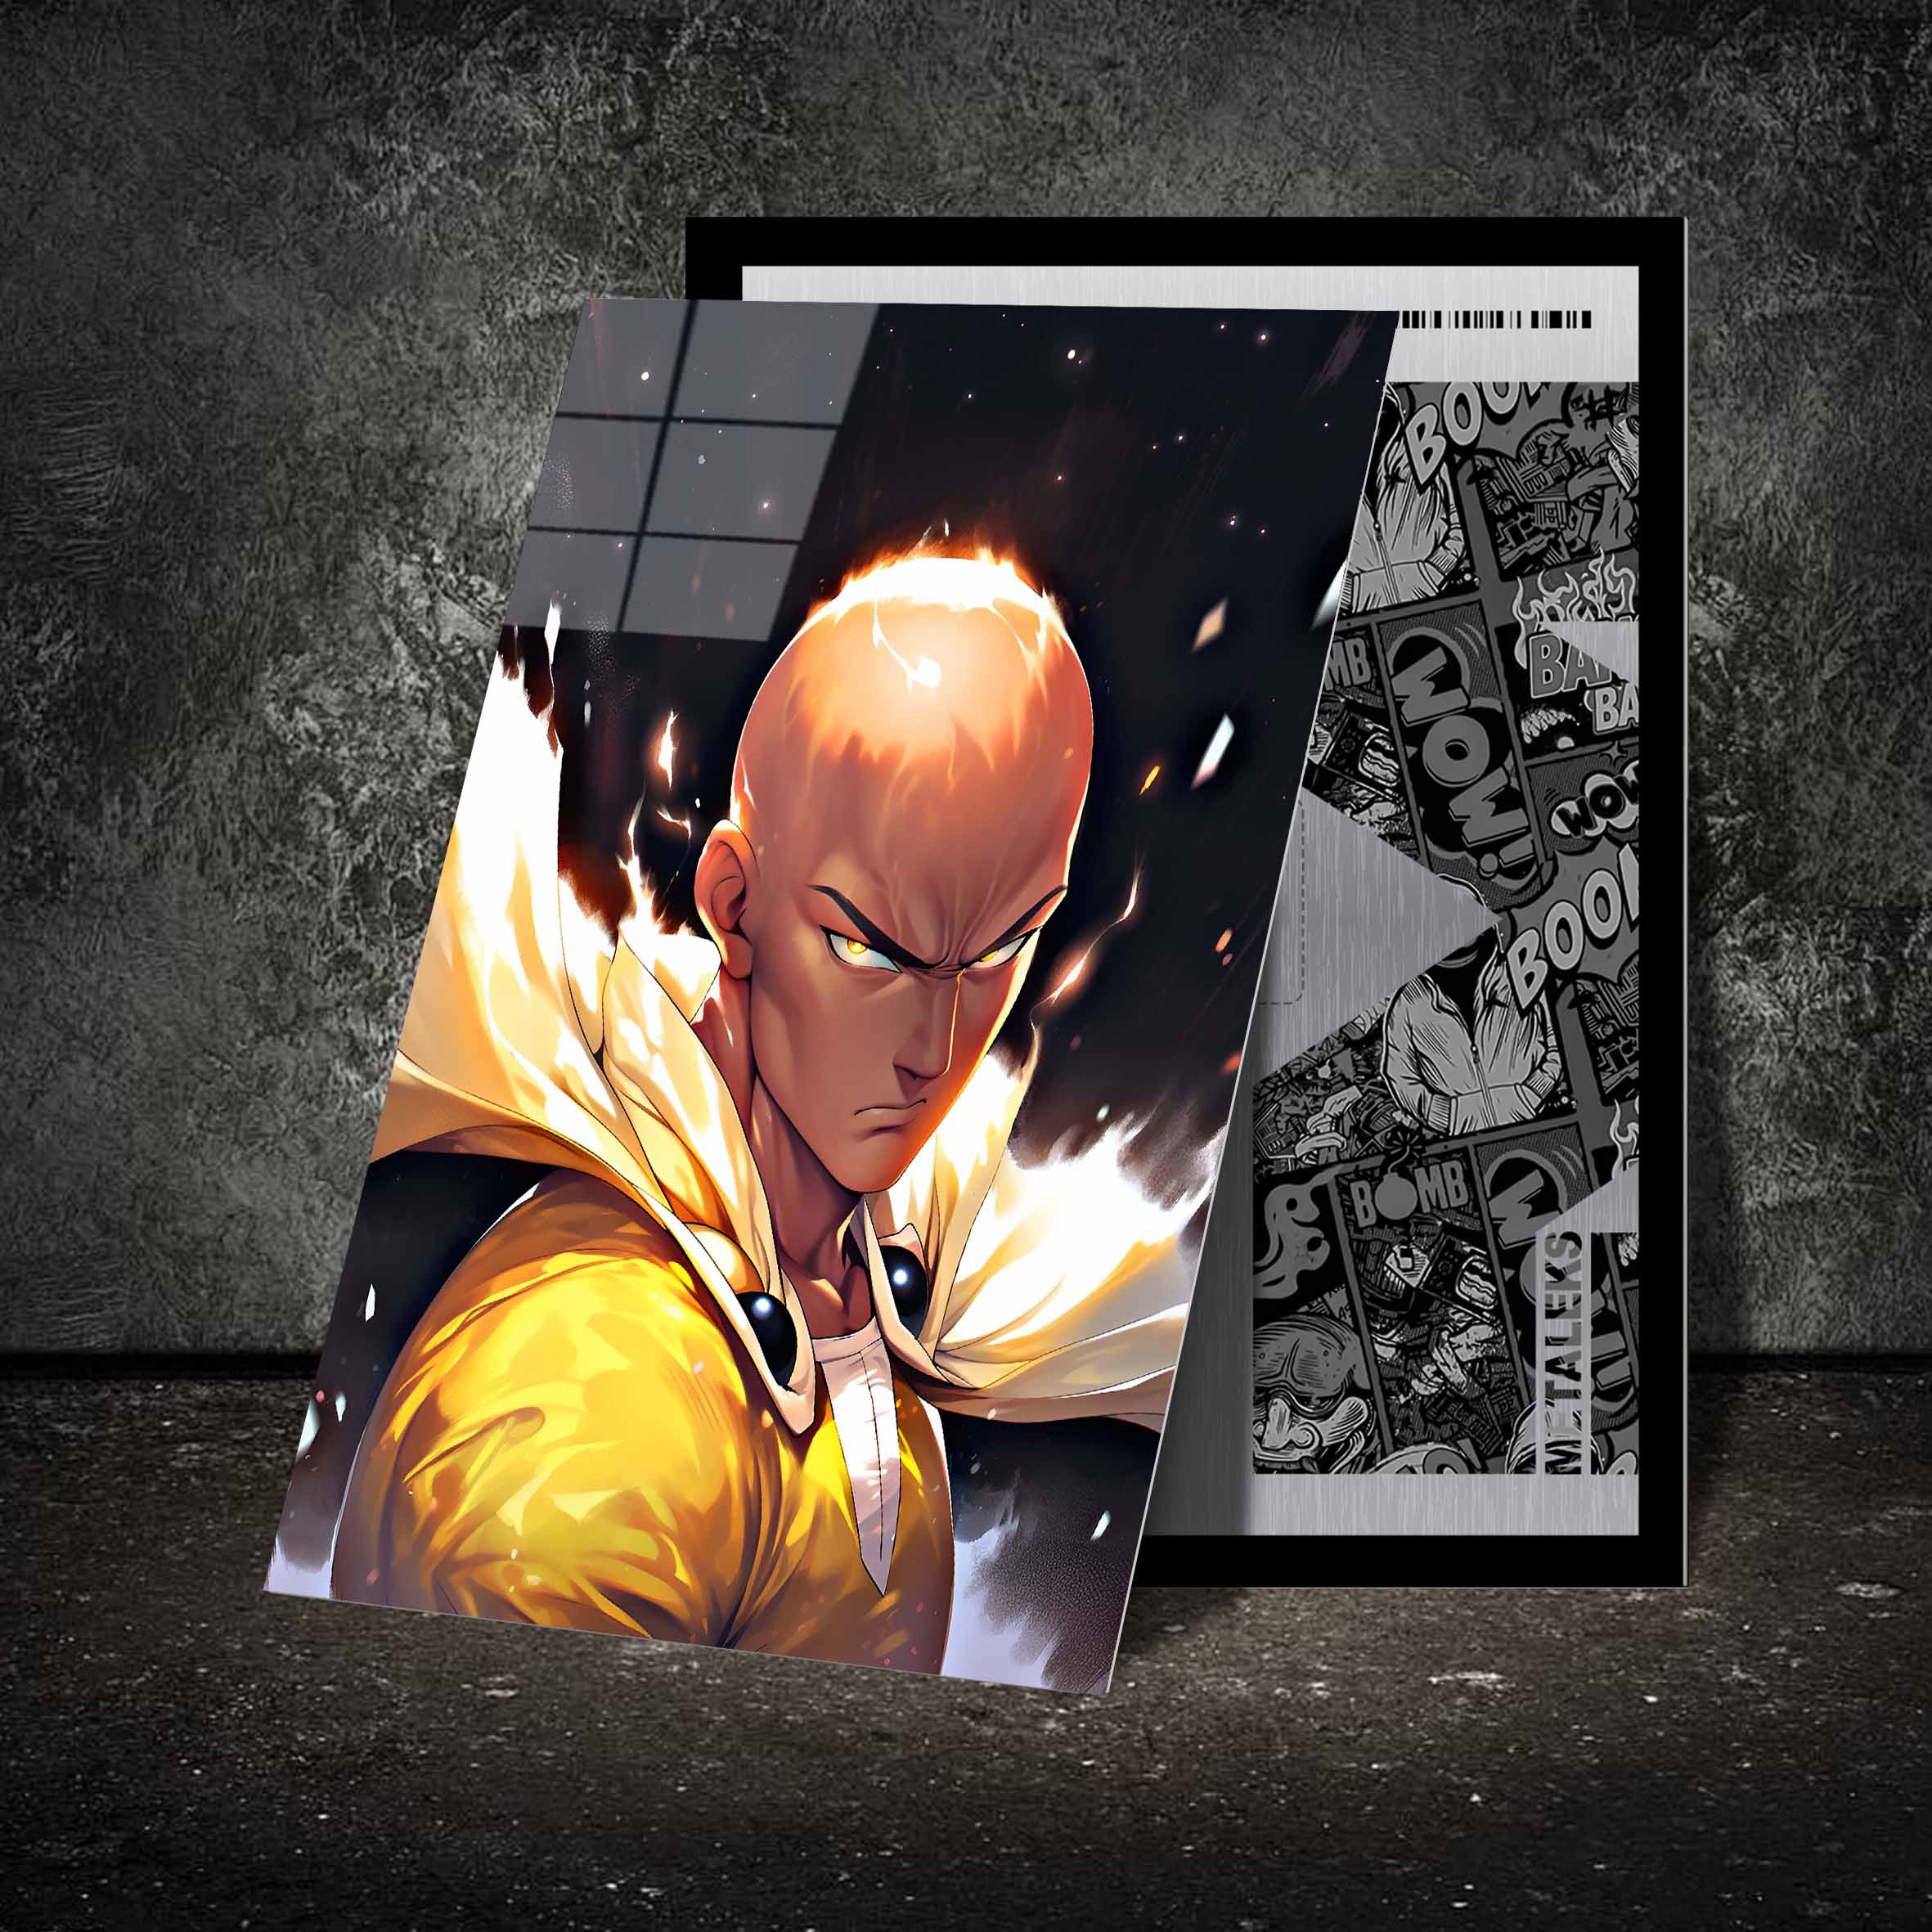 Saitama from one punch man-designed by @Vid_M@tion